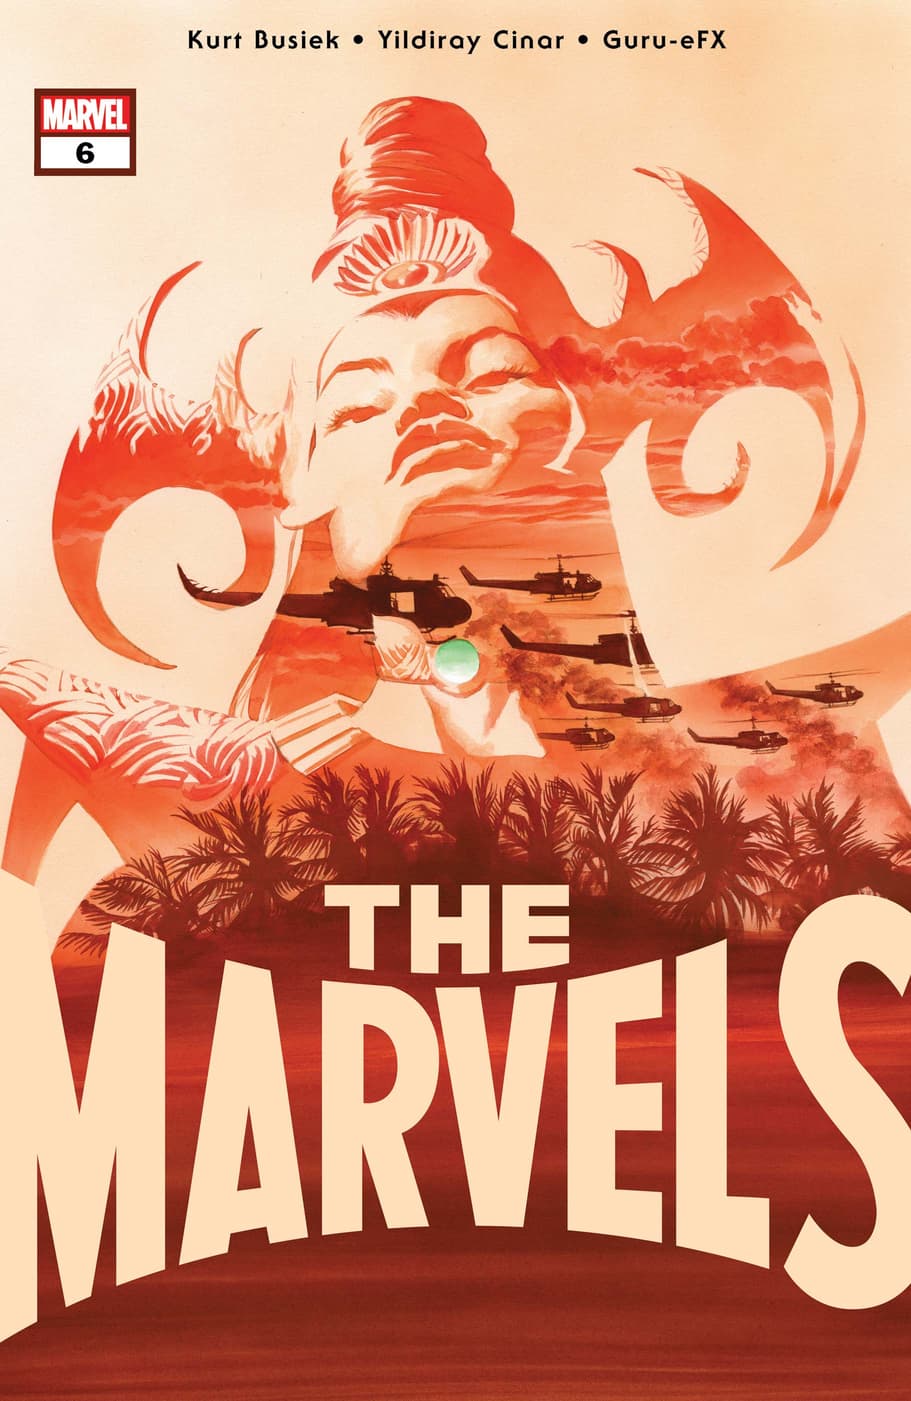 THE MARVELS #6 cover by Alex Ross